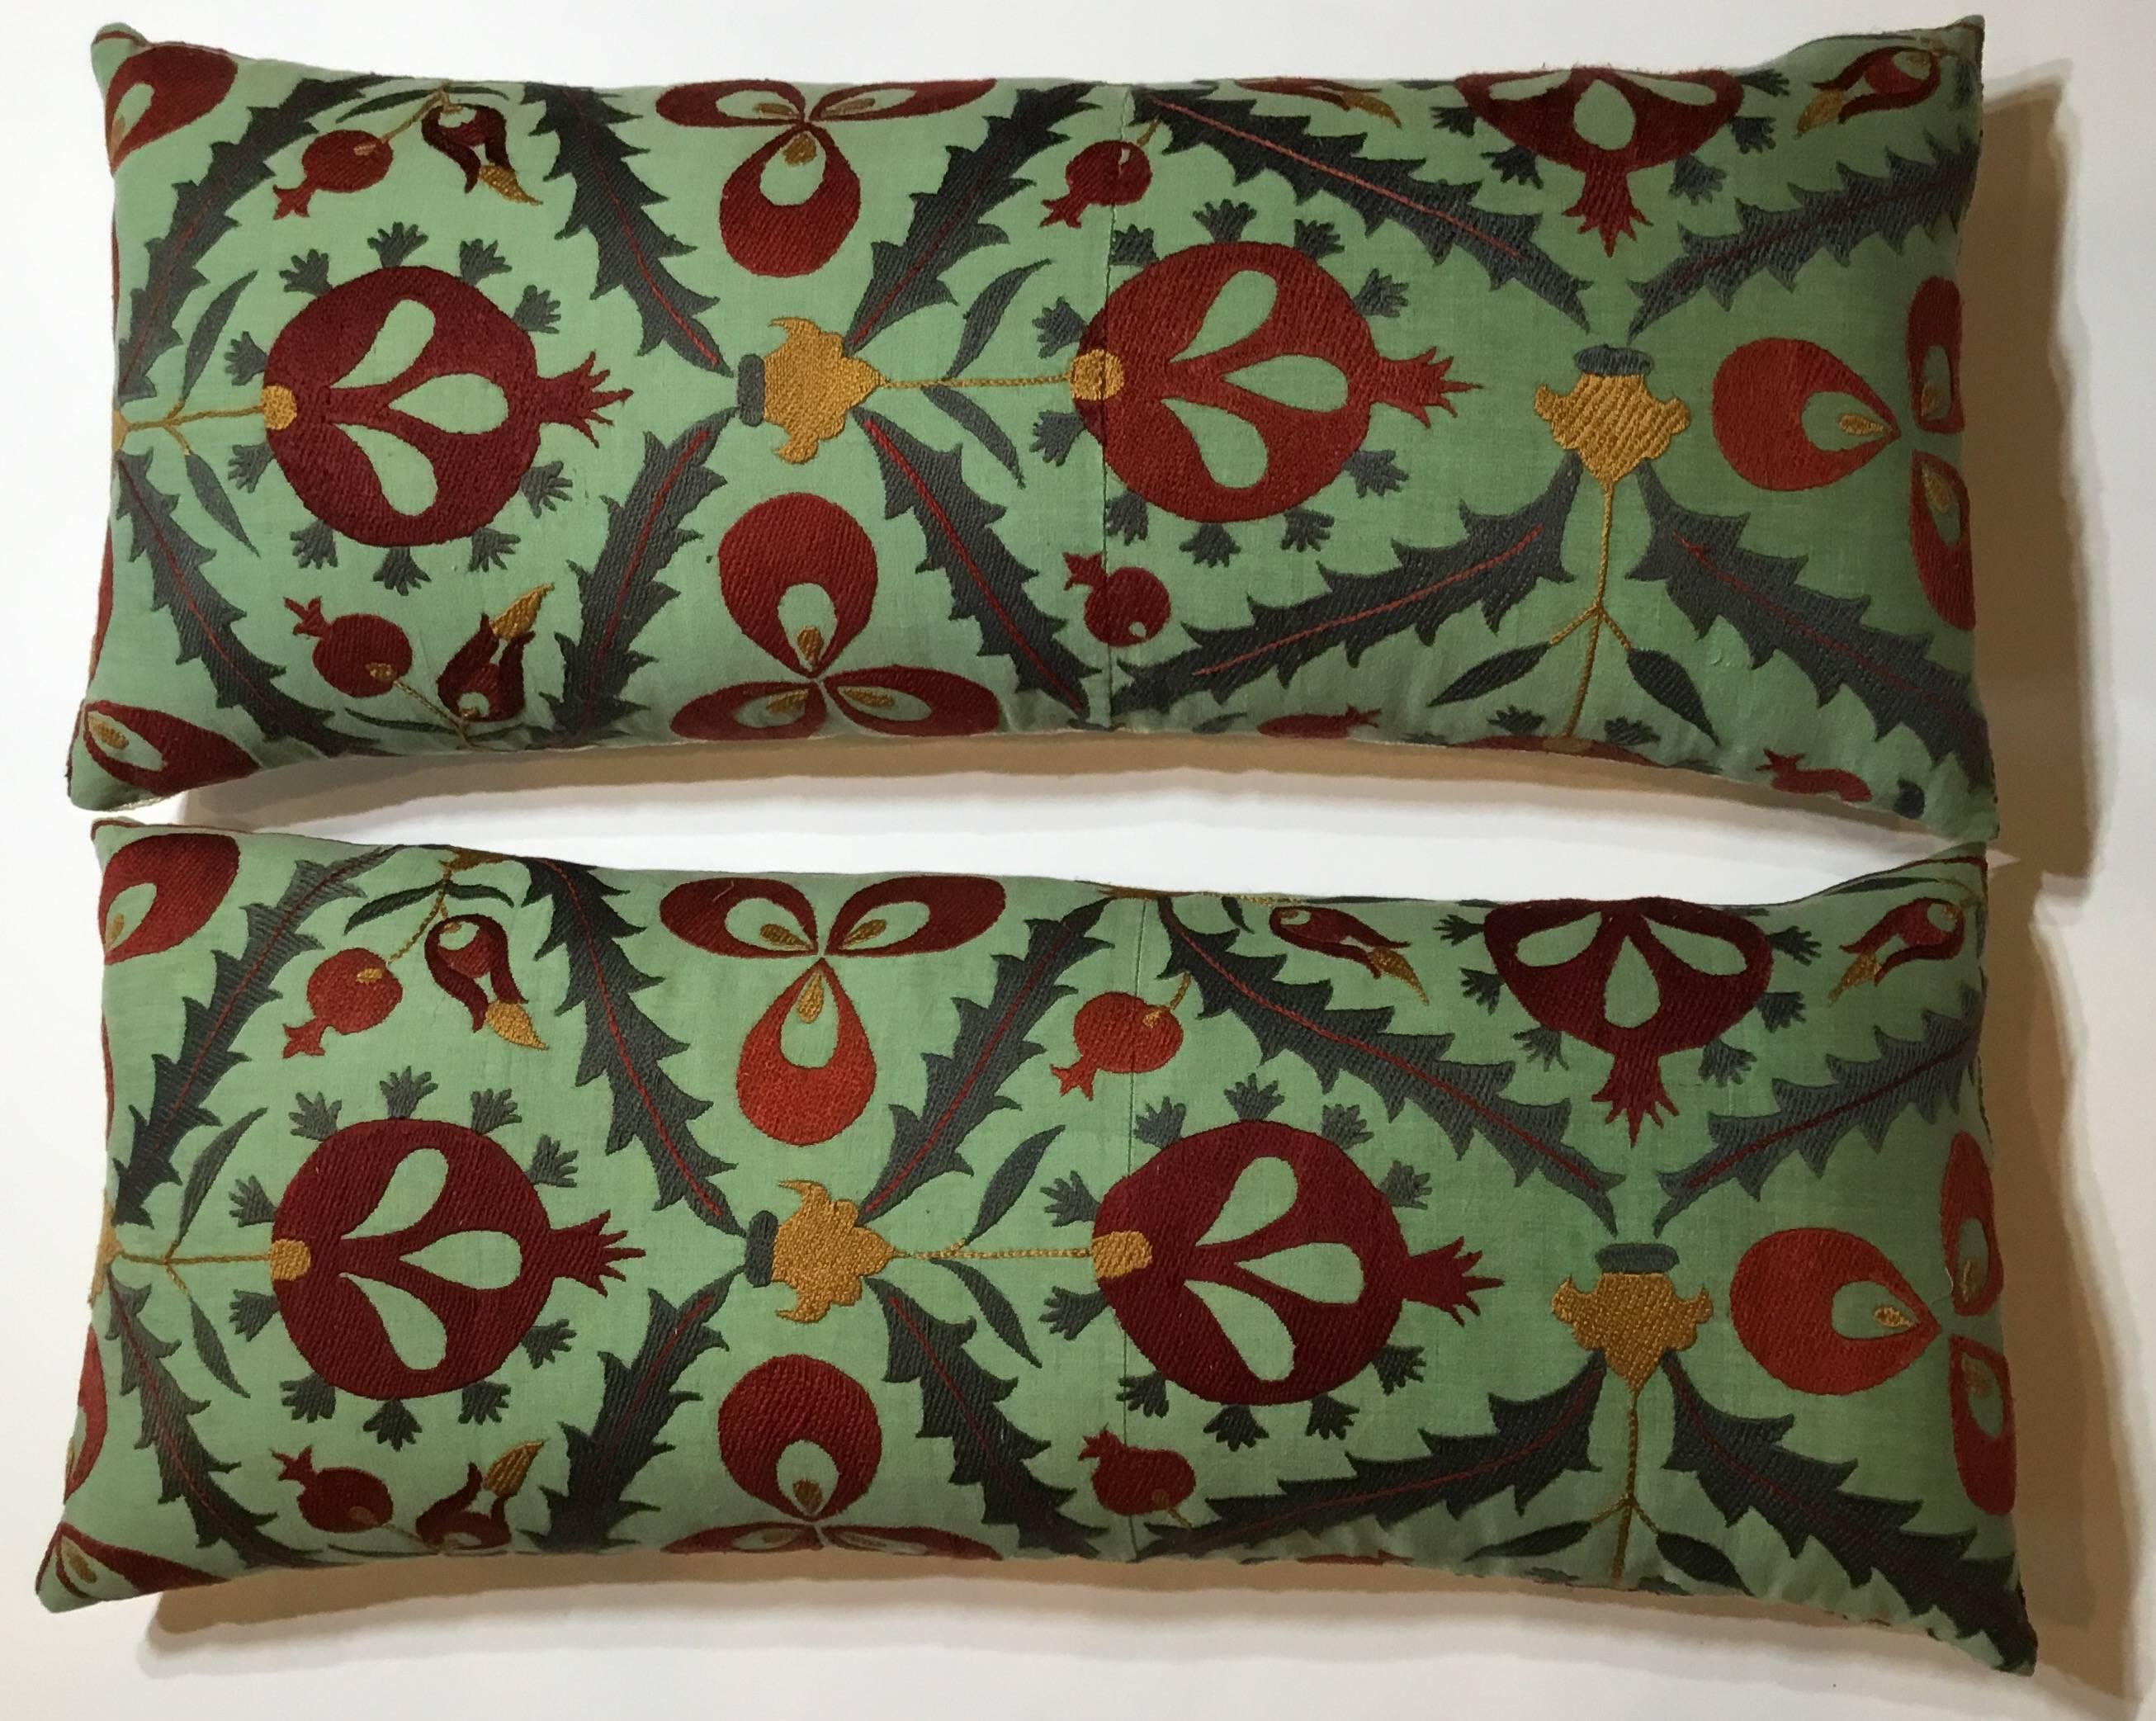 Beautiful pair of pillows made of hand embroidery silk of pomegranate, vines and flowers, on exceptional green color cotton background.
Great decorative pillows.
Fresh inserts, fine backing.